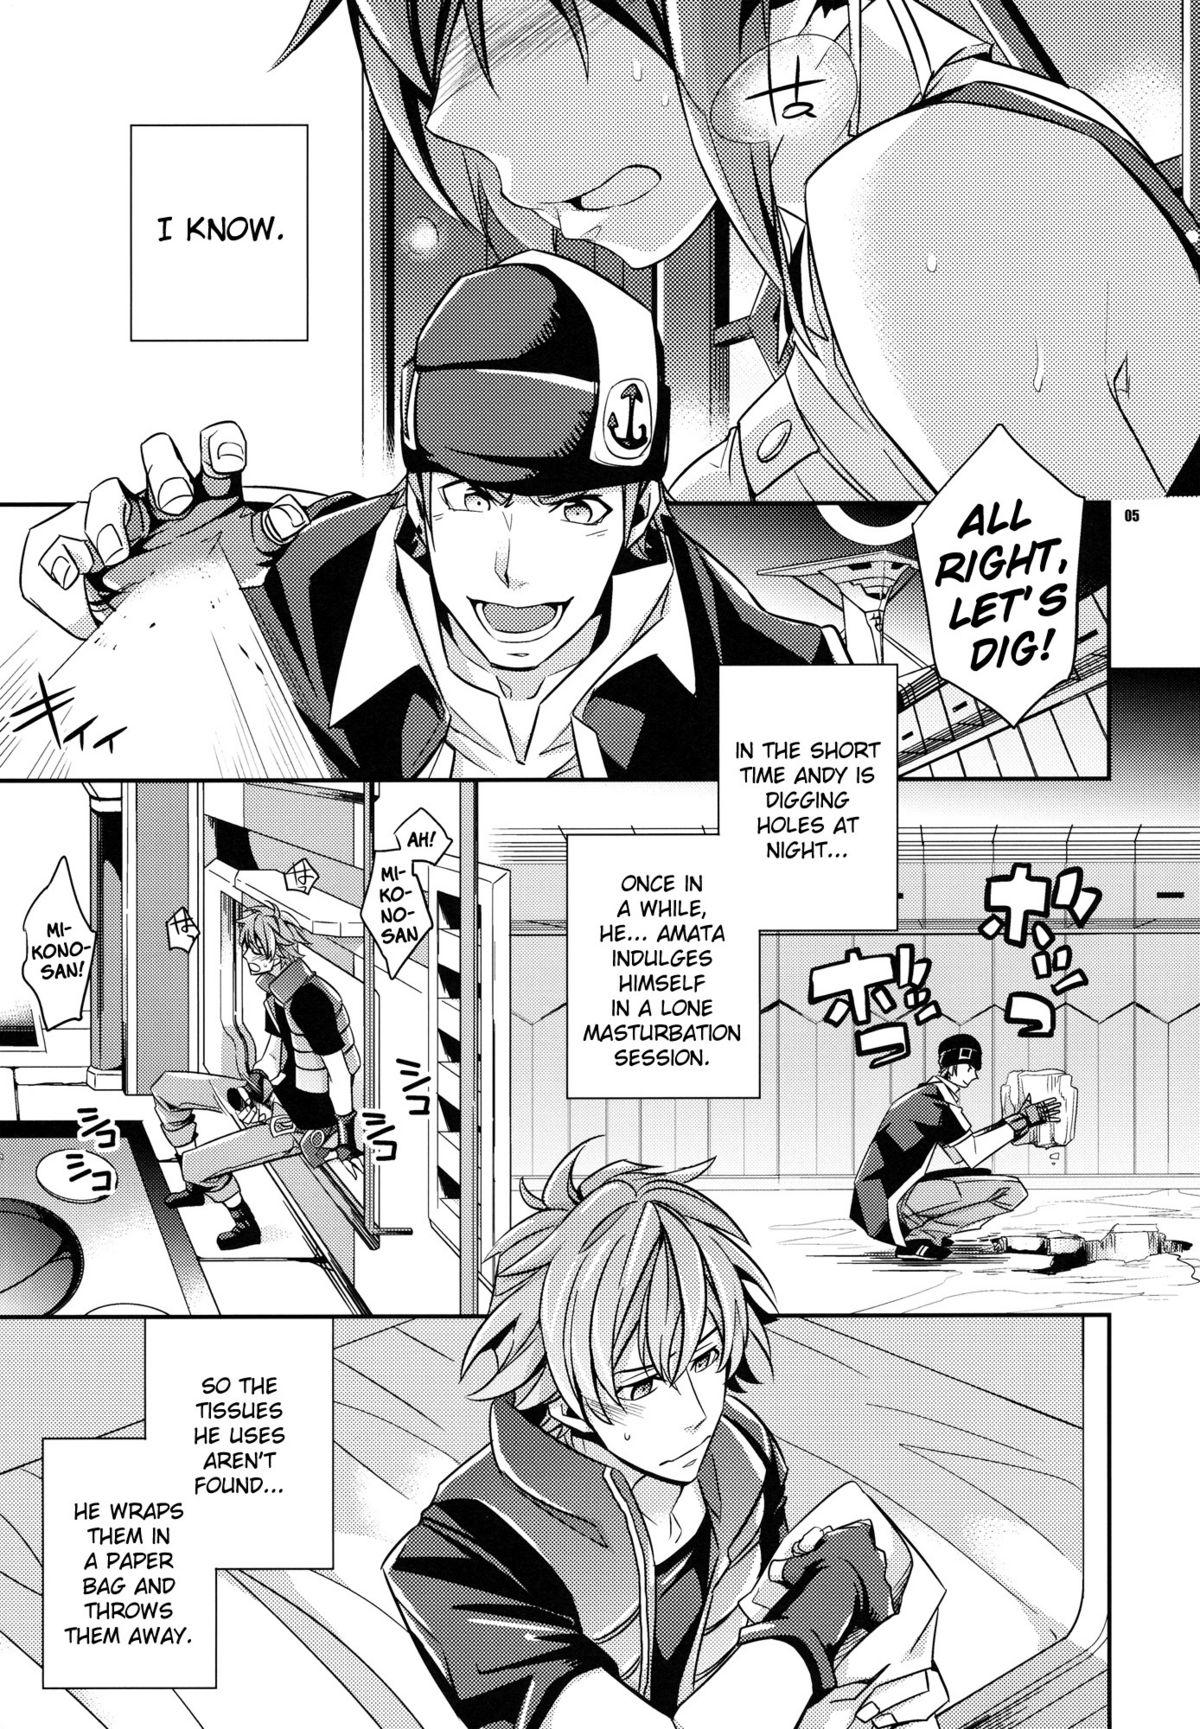 Rope Zessica no Koufukuron | Zessica's Theory of Happiness - Aquarion evol Perfect Girl Porn - Page 3